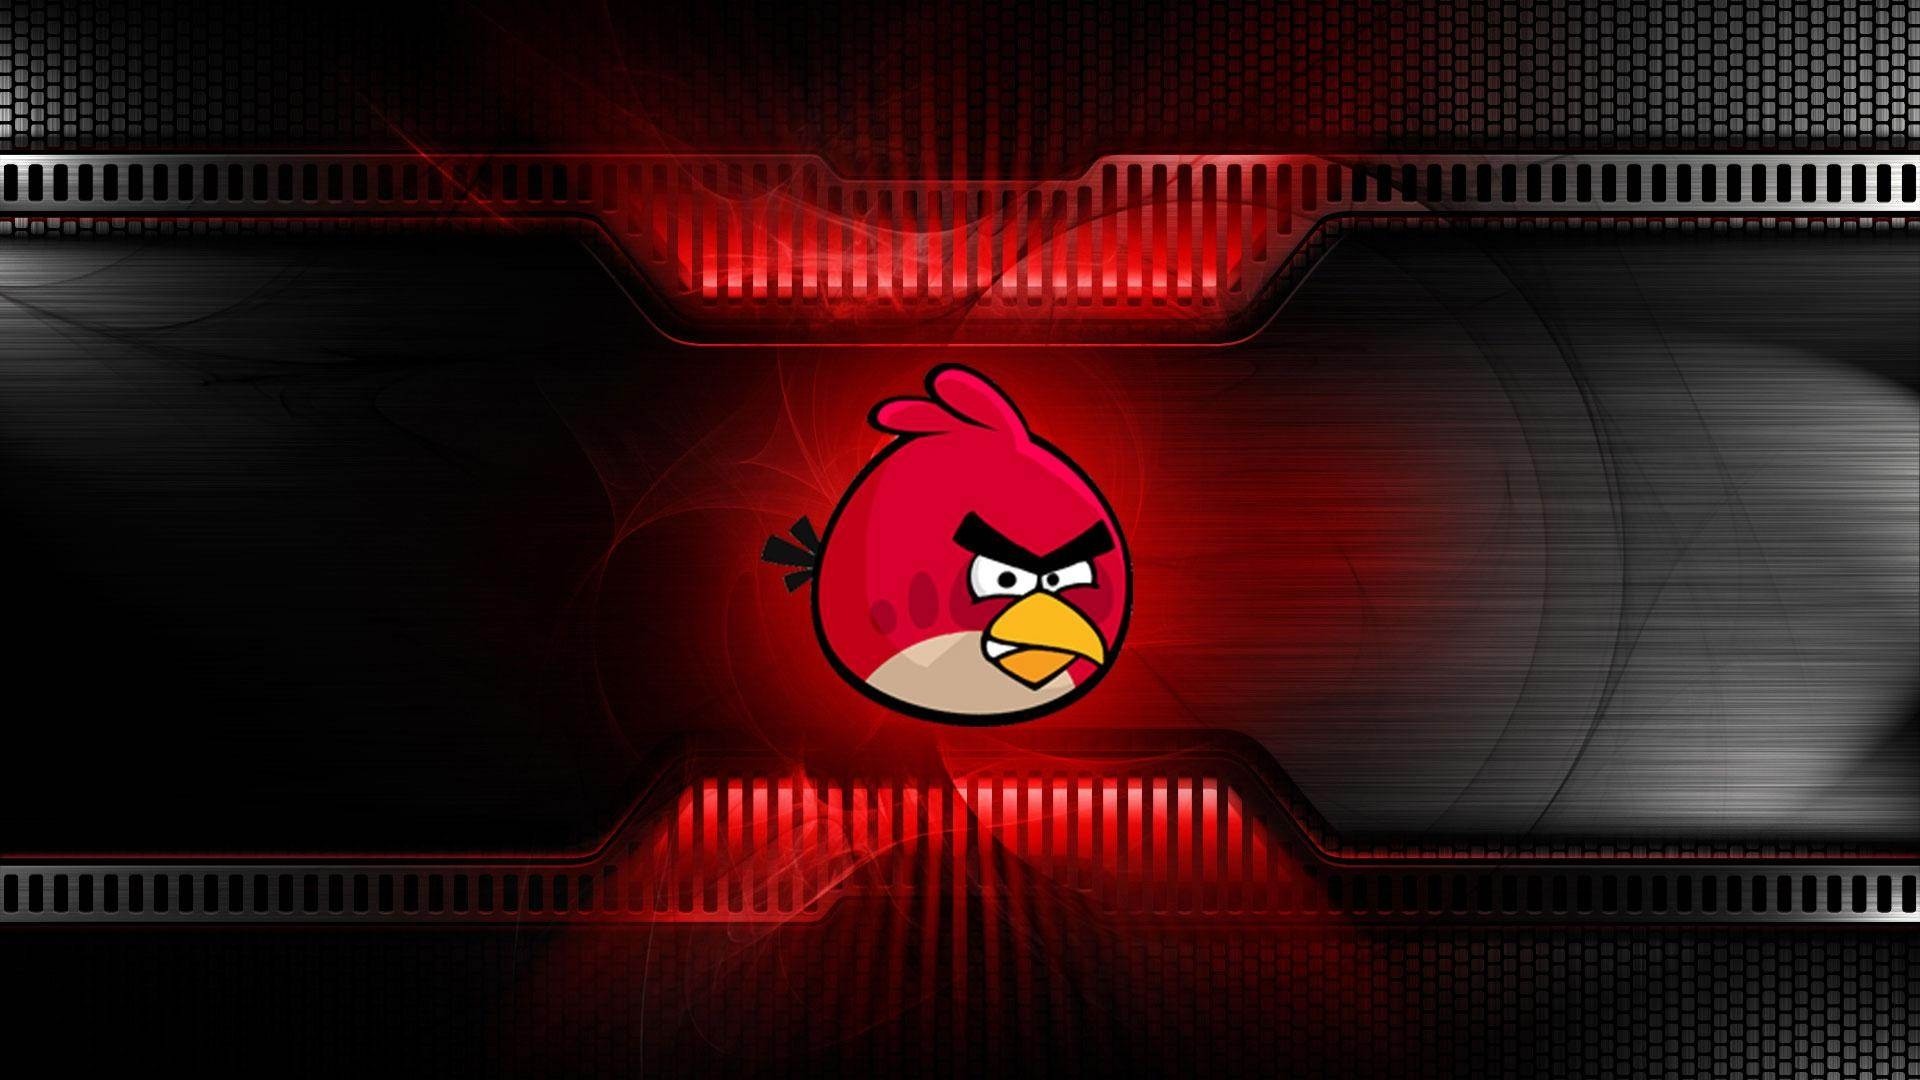 1920x1080 Wallpapers Backgrounds - Angry Birds Red Desktop Background Hayyie